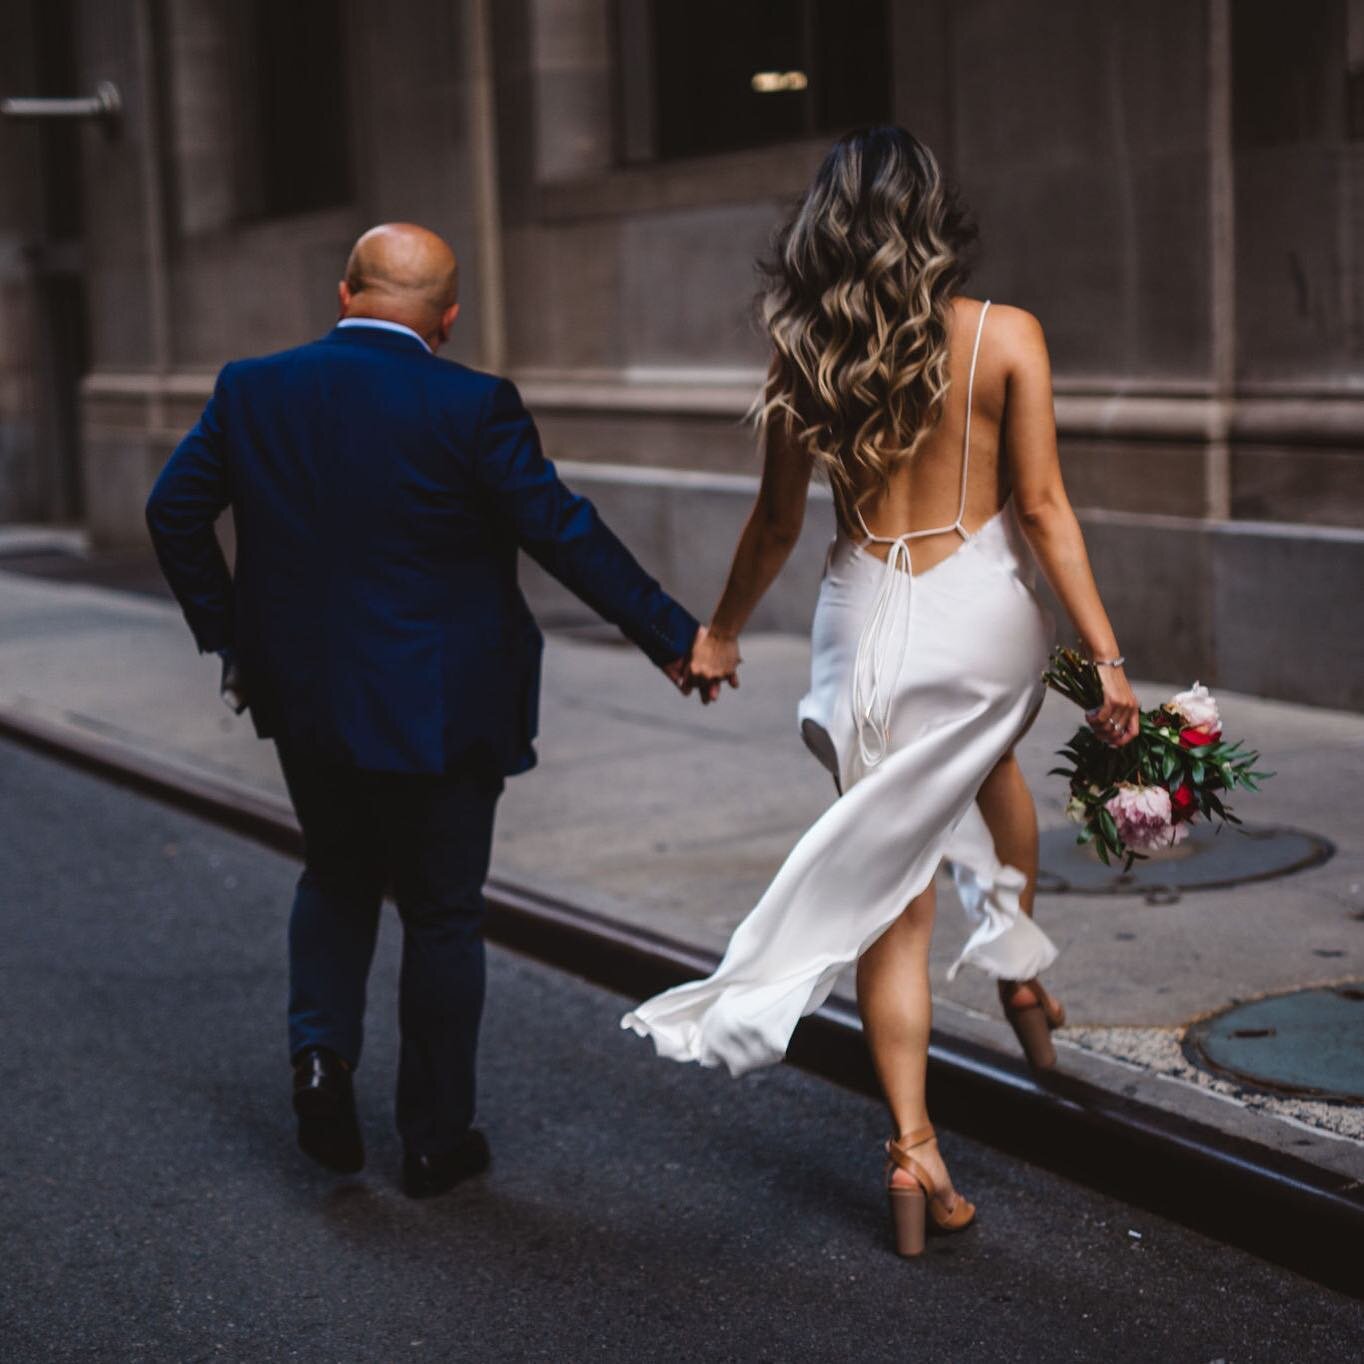 Hand in hand, and ready to take over the world together. #nycbride 🔥